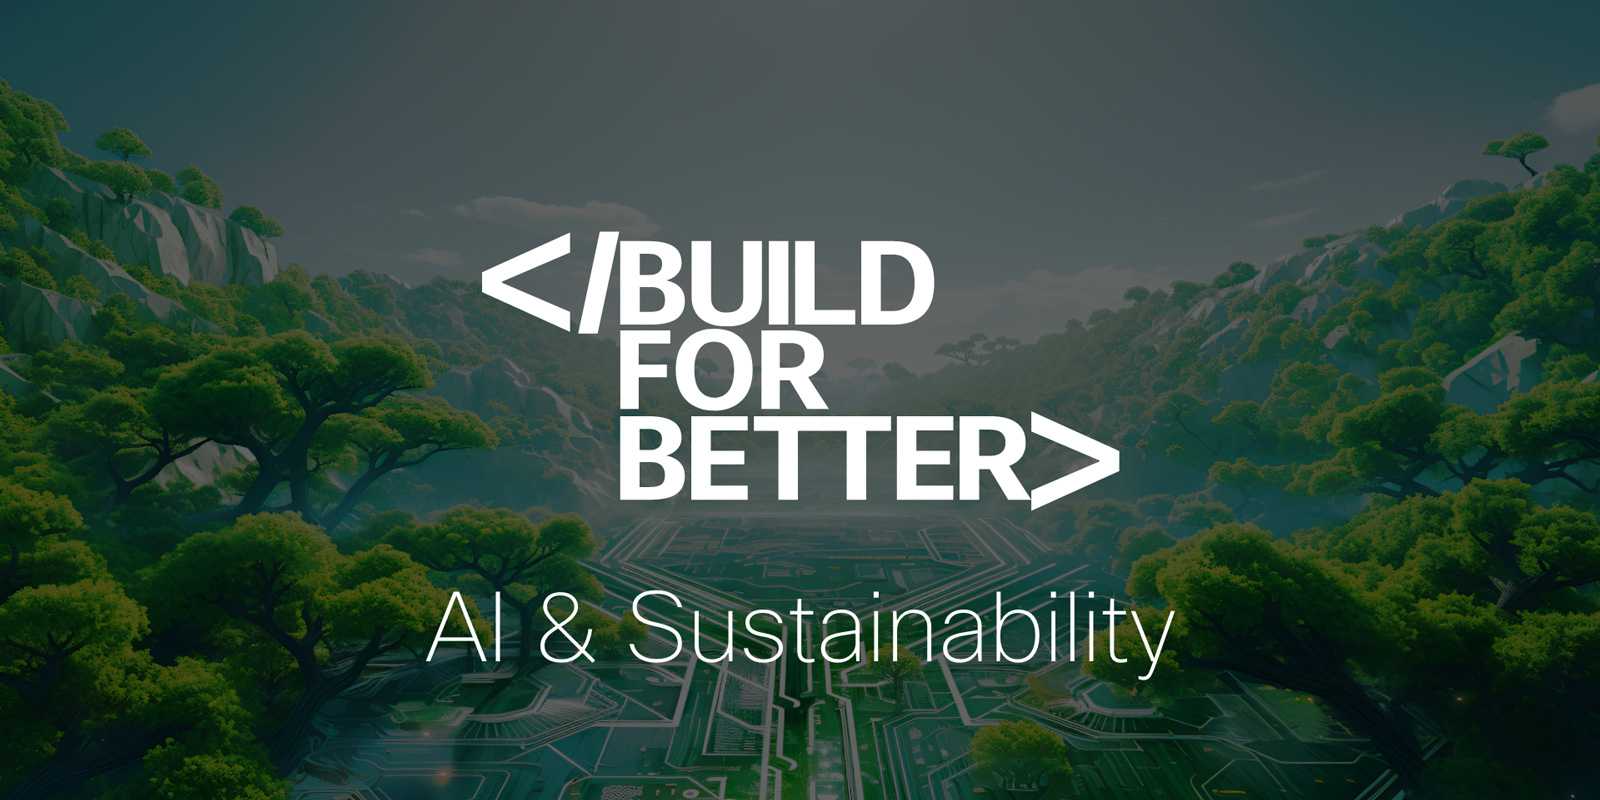 AI in a sustainable way